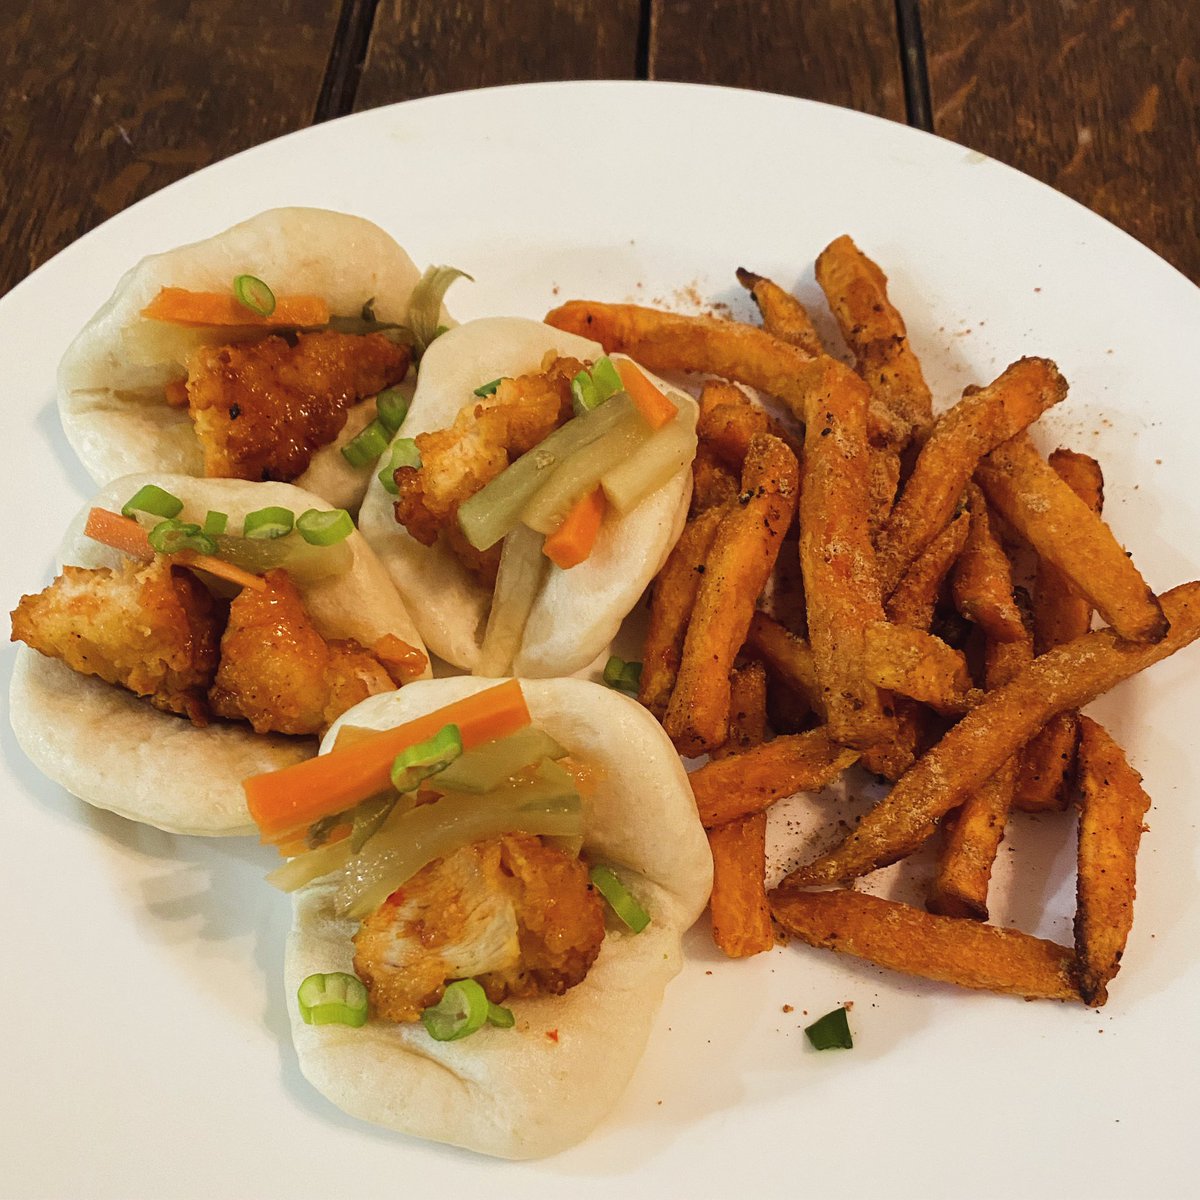 Grand tip: bao dough is ridiculously easy to make and freezes great. Slap some chopped chicken strip, chili sauce, and pickled banh mi veg on and serve with gochujang sweet potato fries and you’ve got a 10 minute dinner